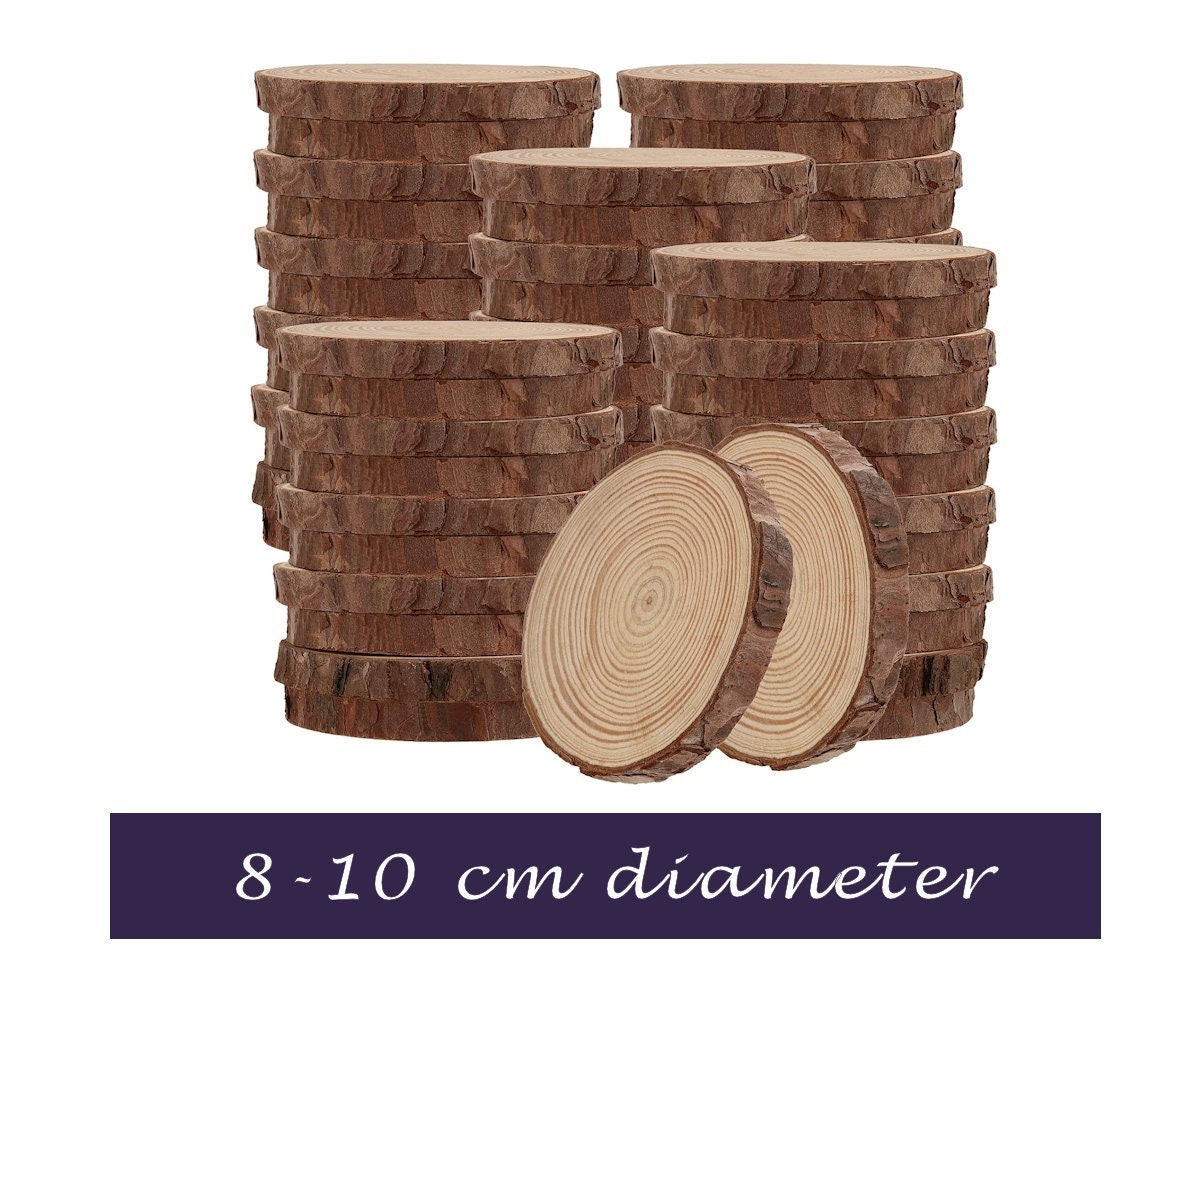 9 Dia | Rustic Natural Wood Slices, Round Poplar Wood Slabs, Table Centerpieces | by Tableclothsfactory